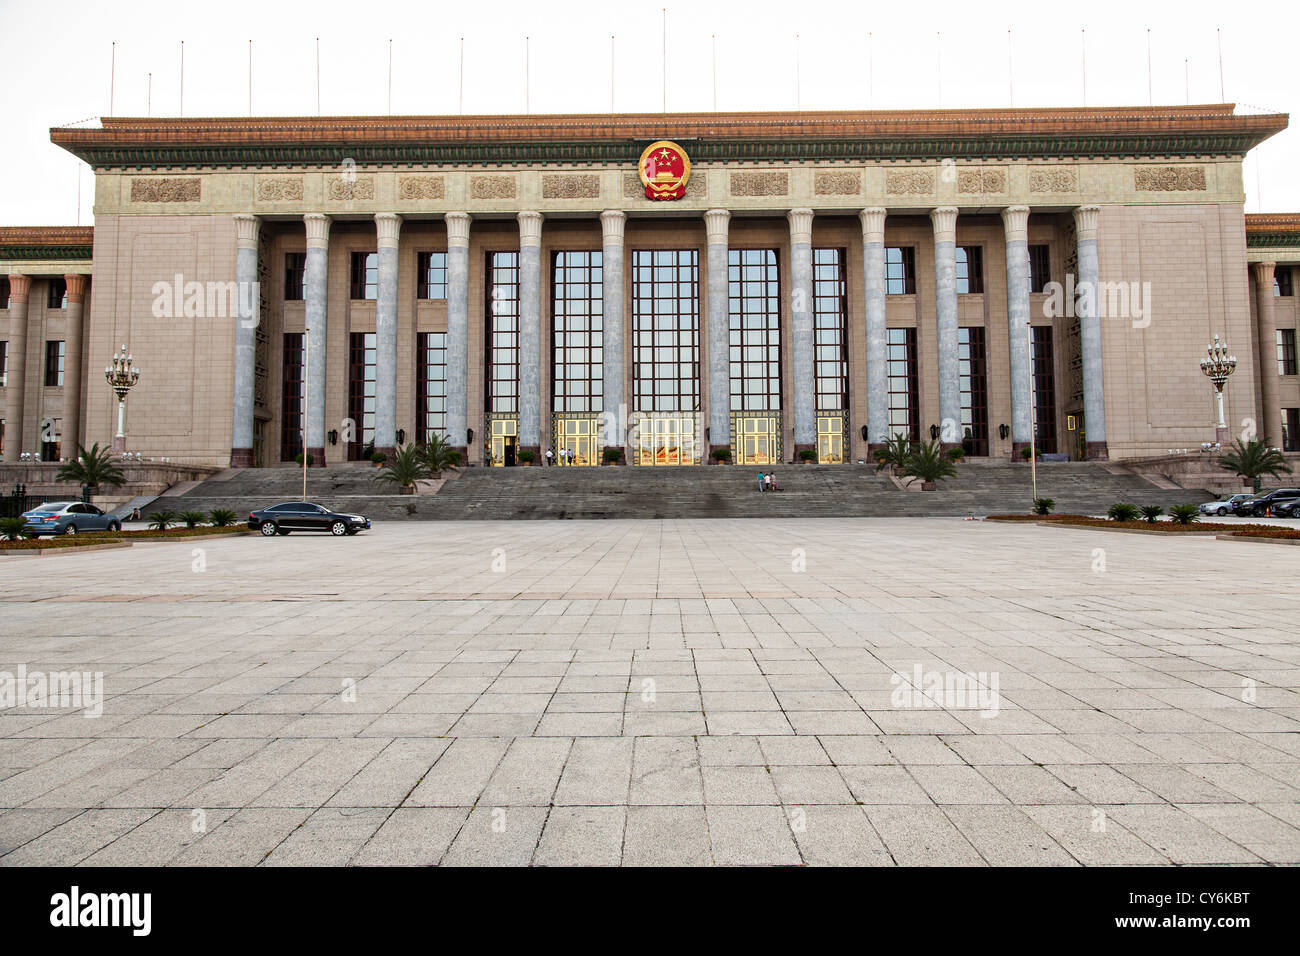 The Great Hall of the People in Beijing, China Stock Photo